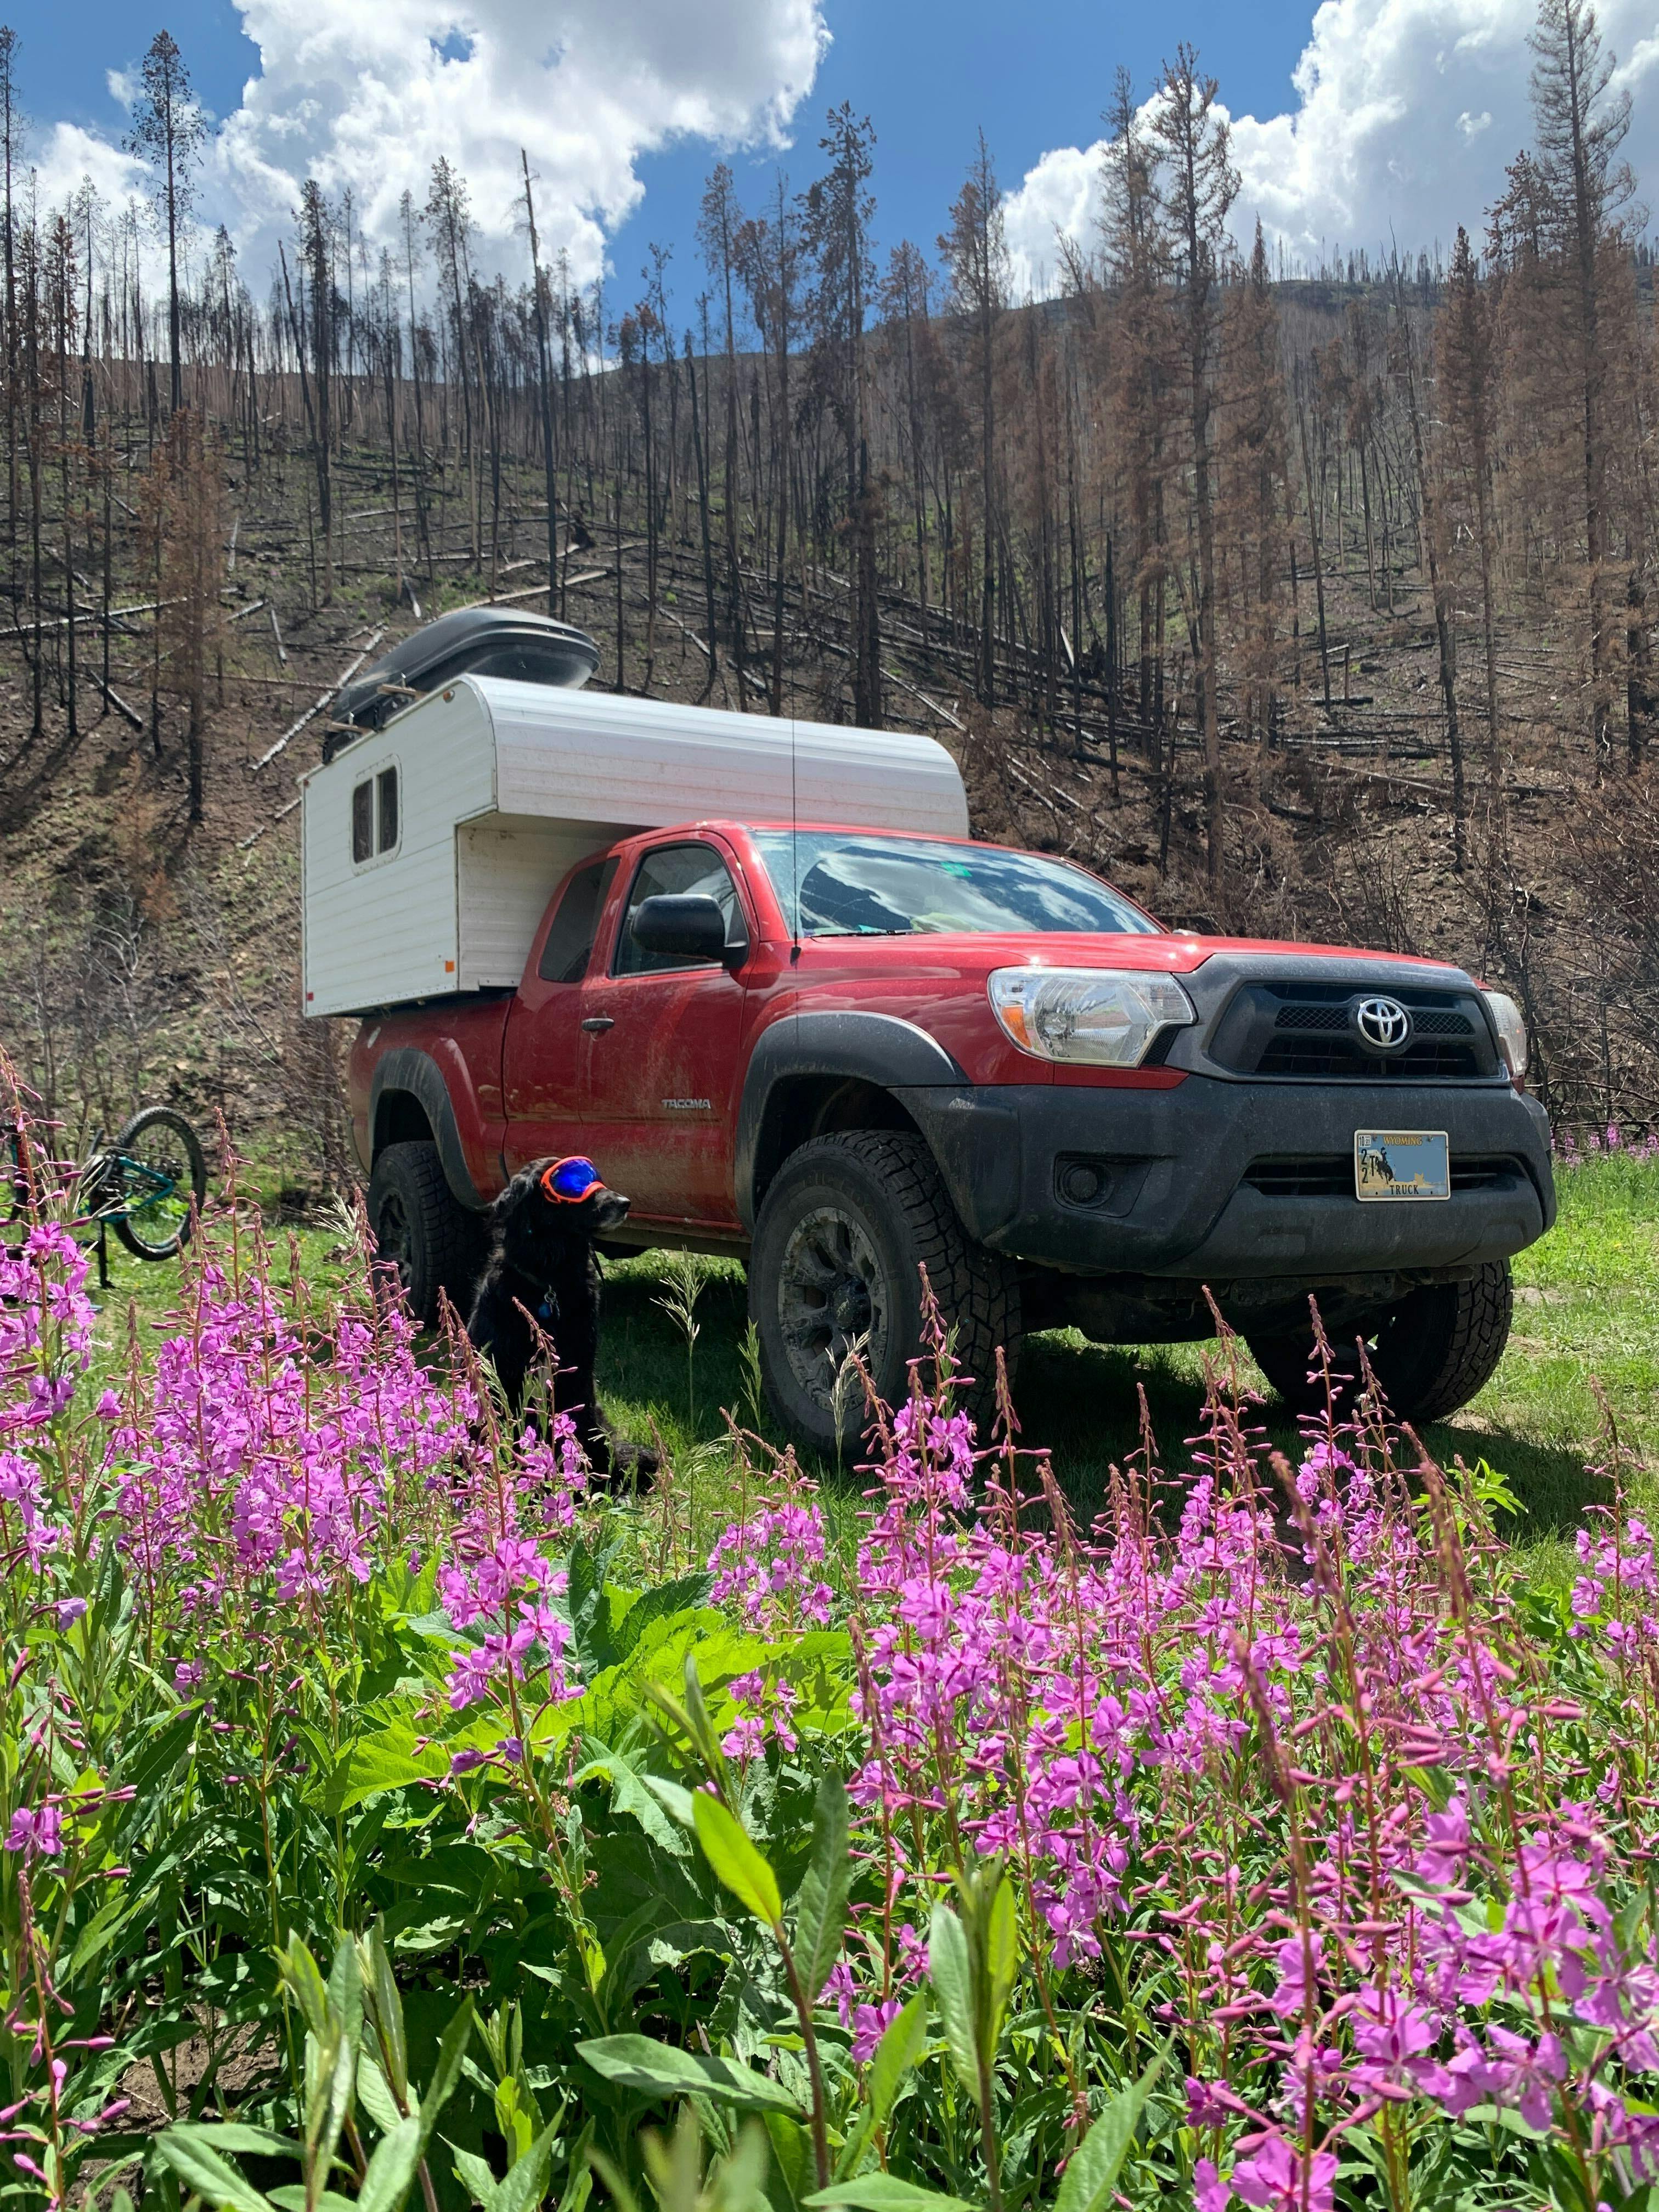 A red truck with a white camper is parked in a grassy area with purple flowers.